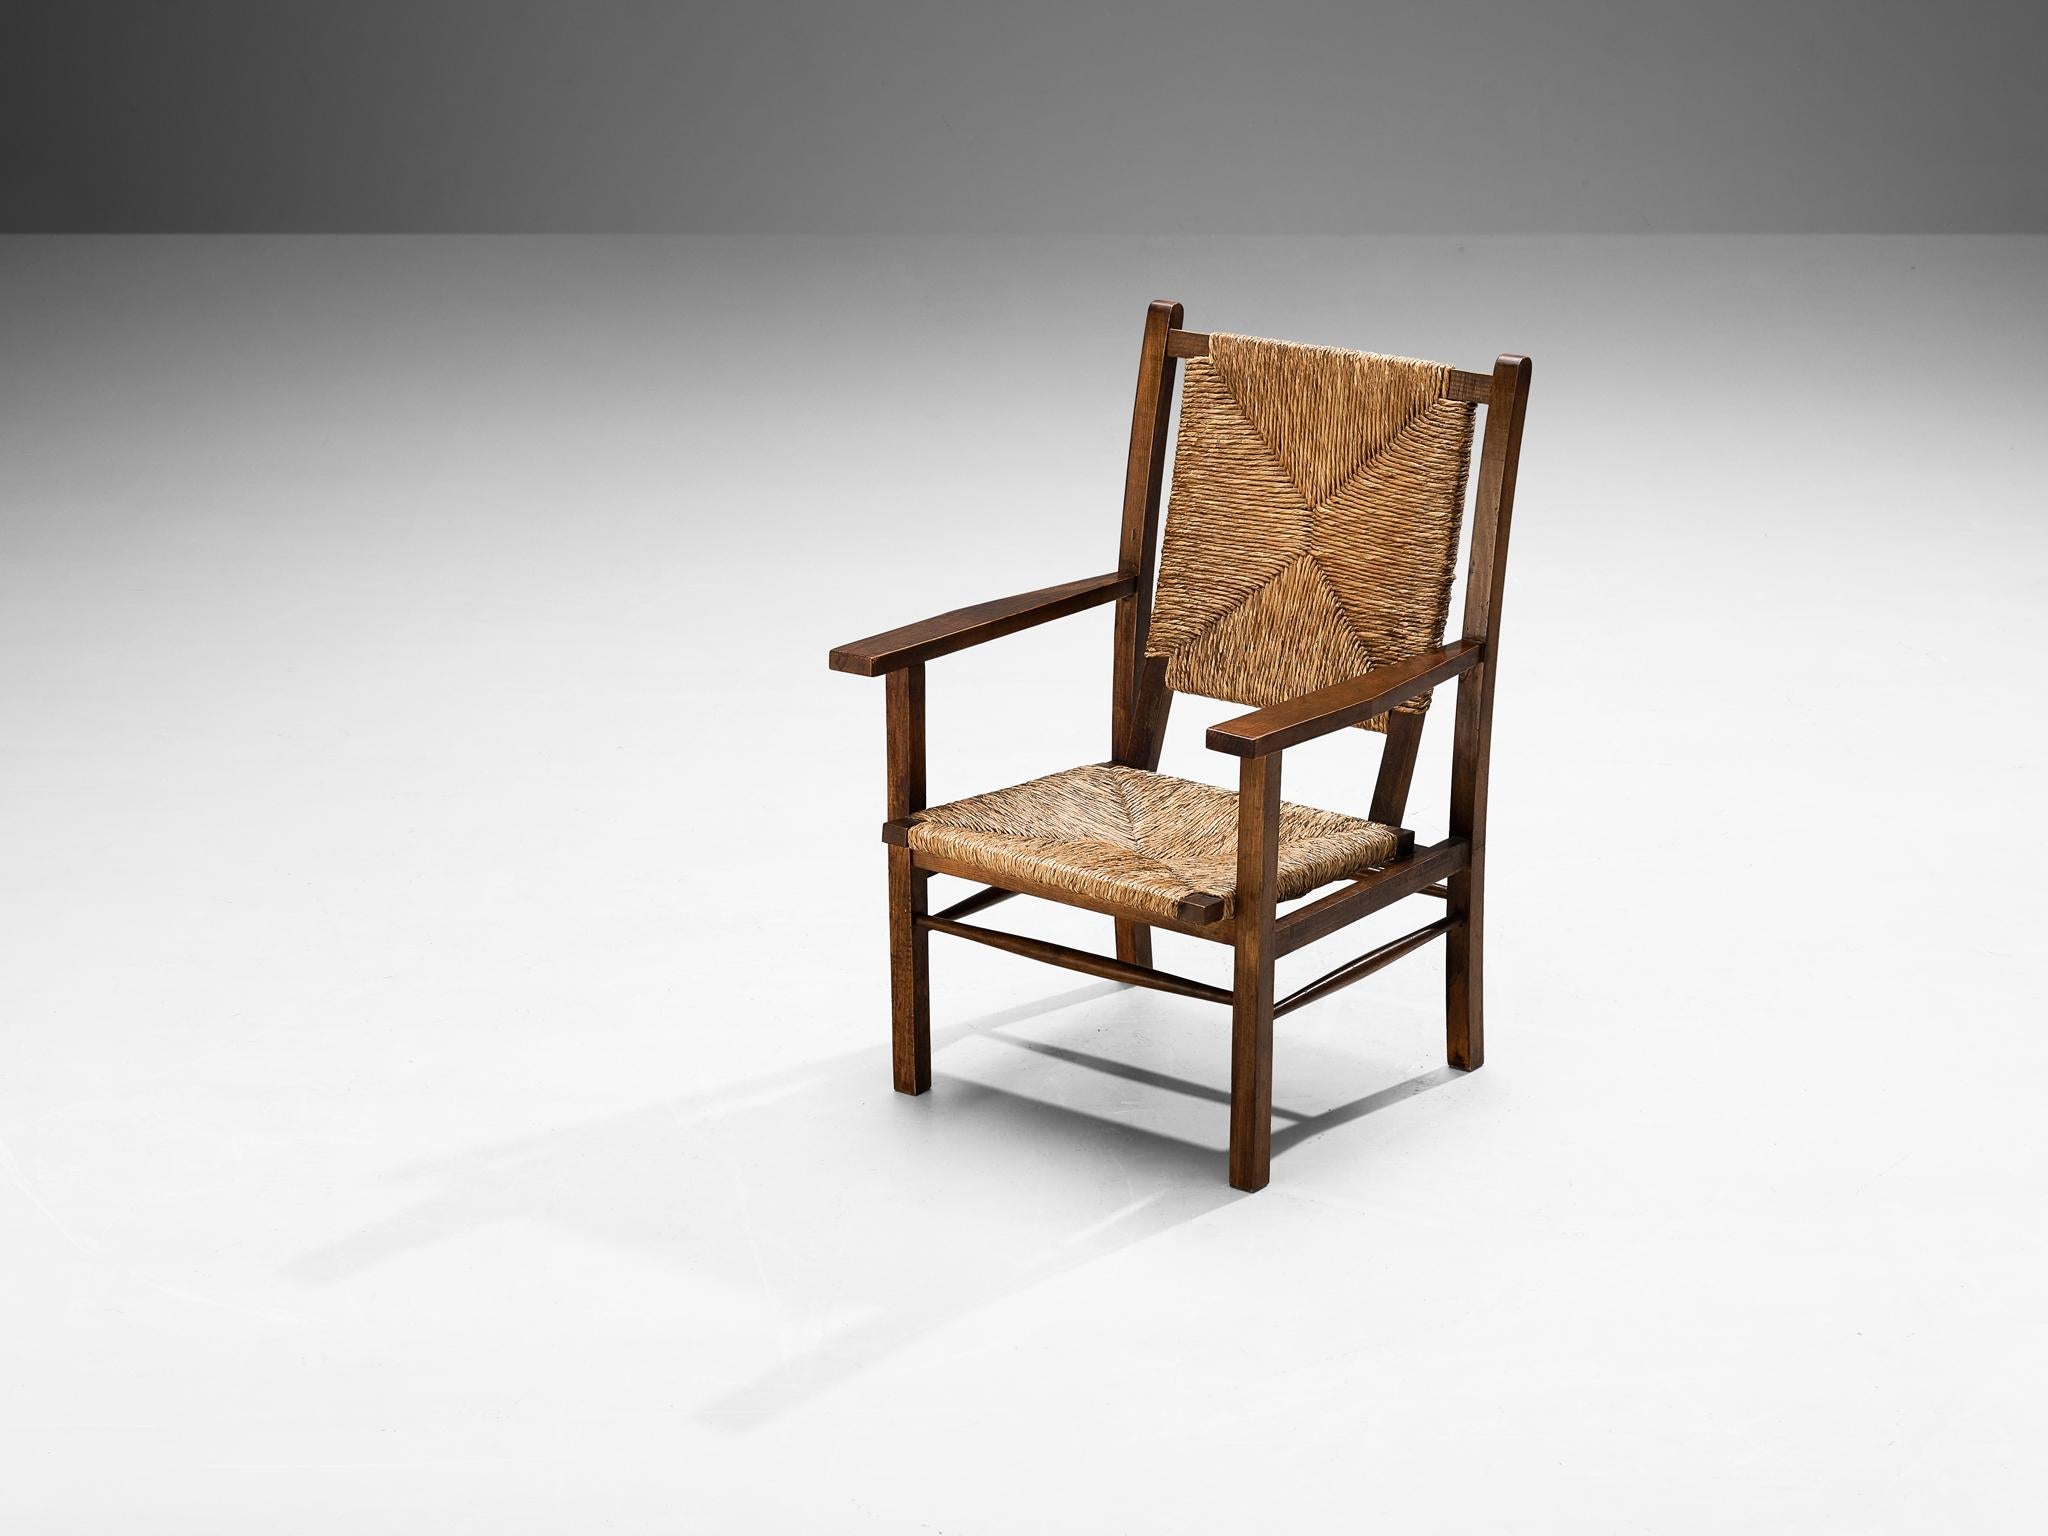 Spanish Armchair in Pine and Woven Straw